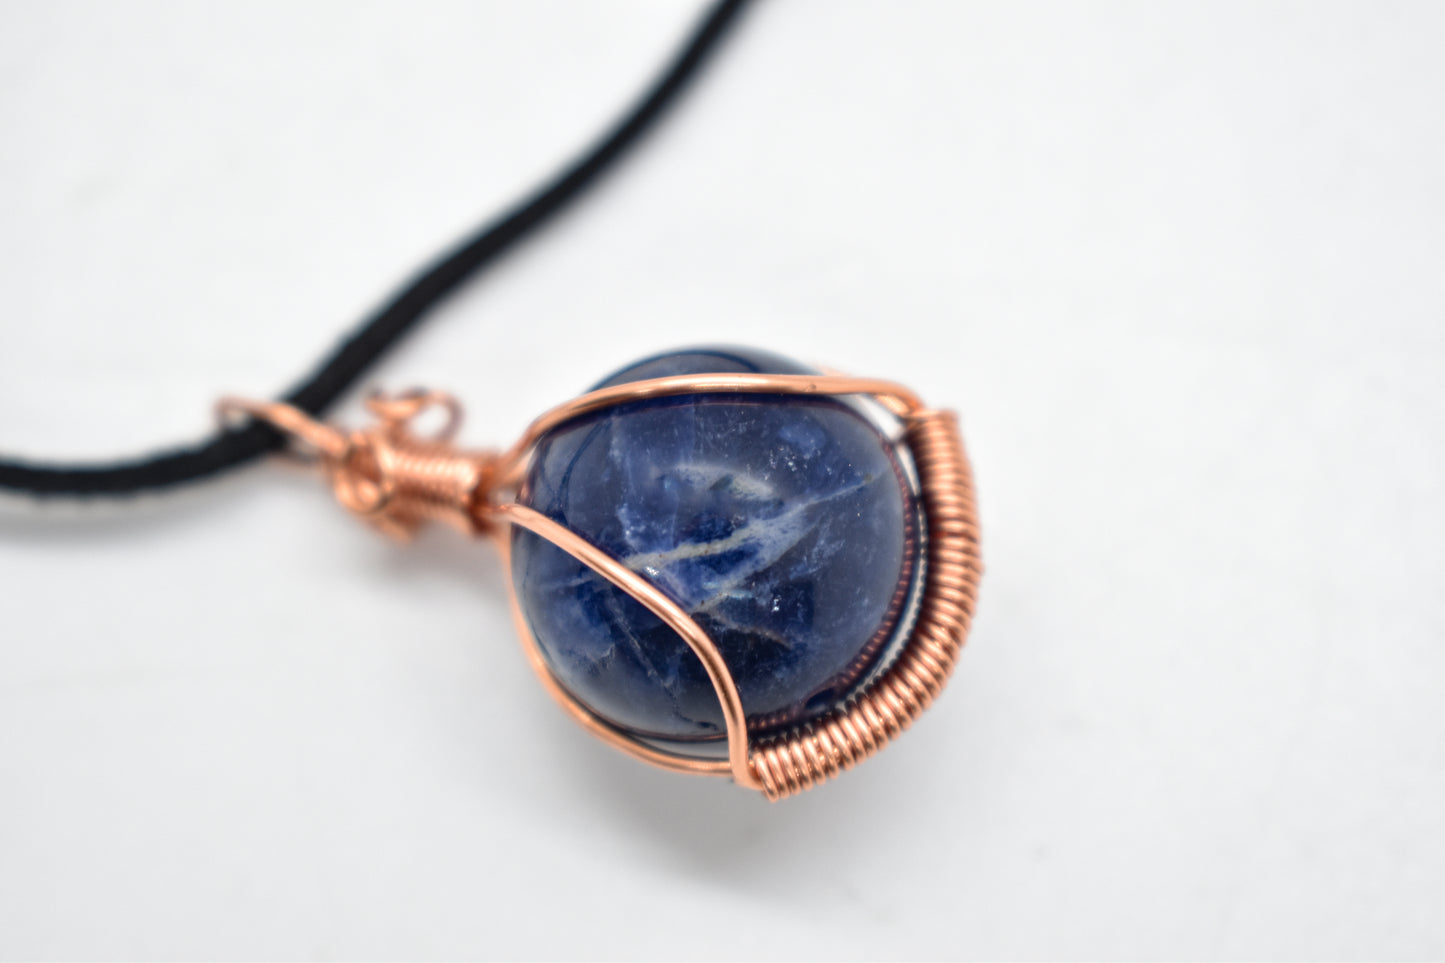 Copper Wrapped Sodalite Bead Necklace